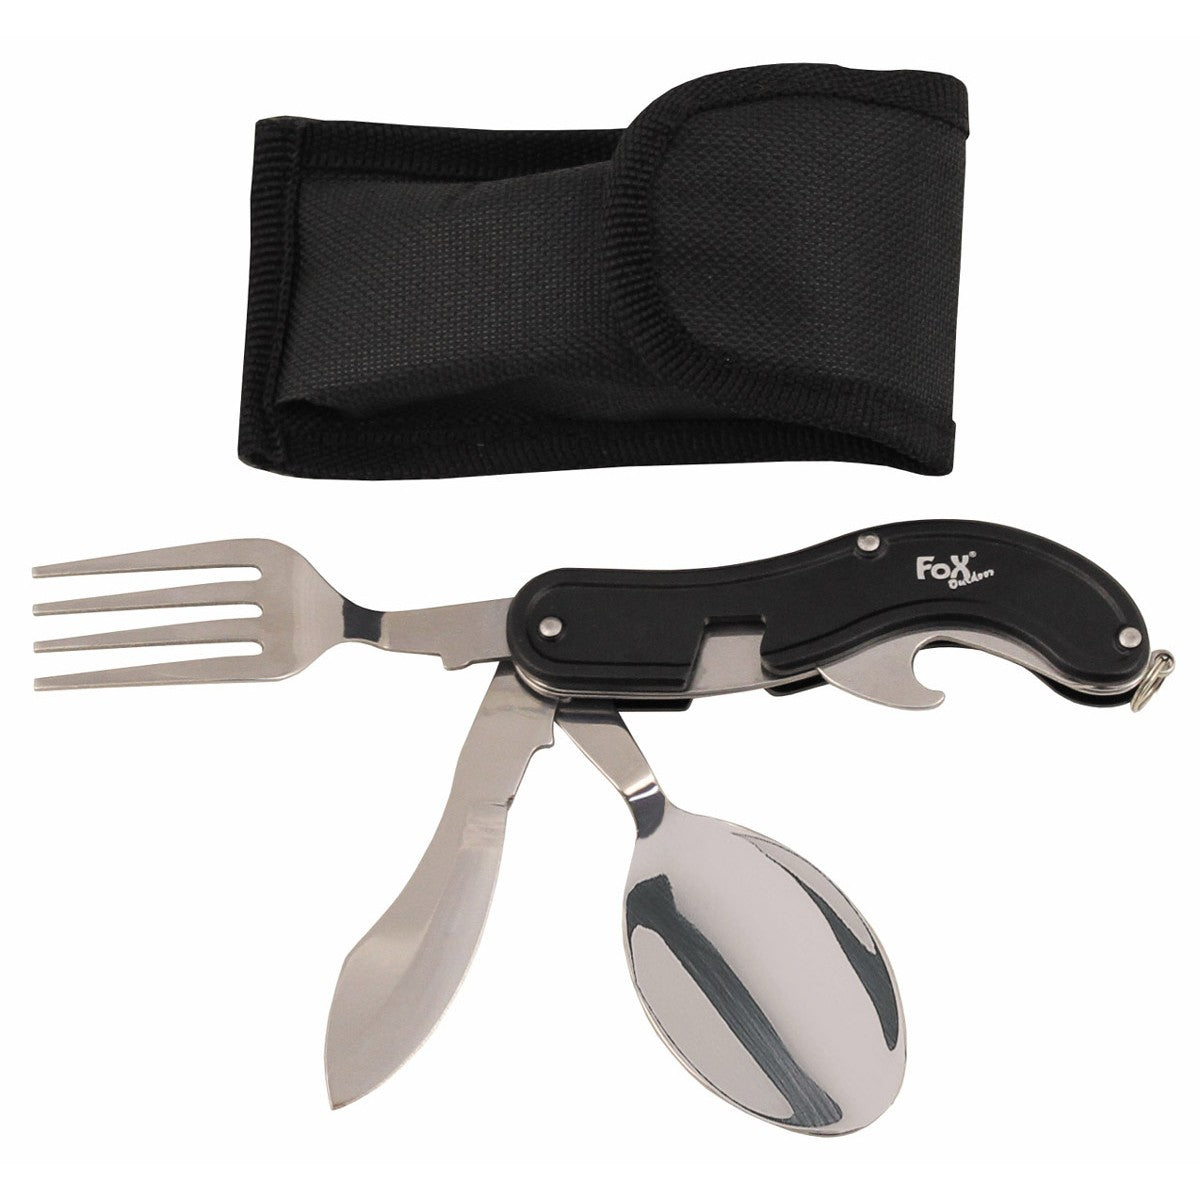 Pocket knife cutlery 4 in 1 complete cutlery knife fork spoon bottle opener can be dismantled into 2 parts for use